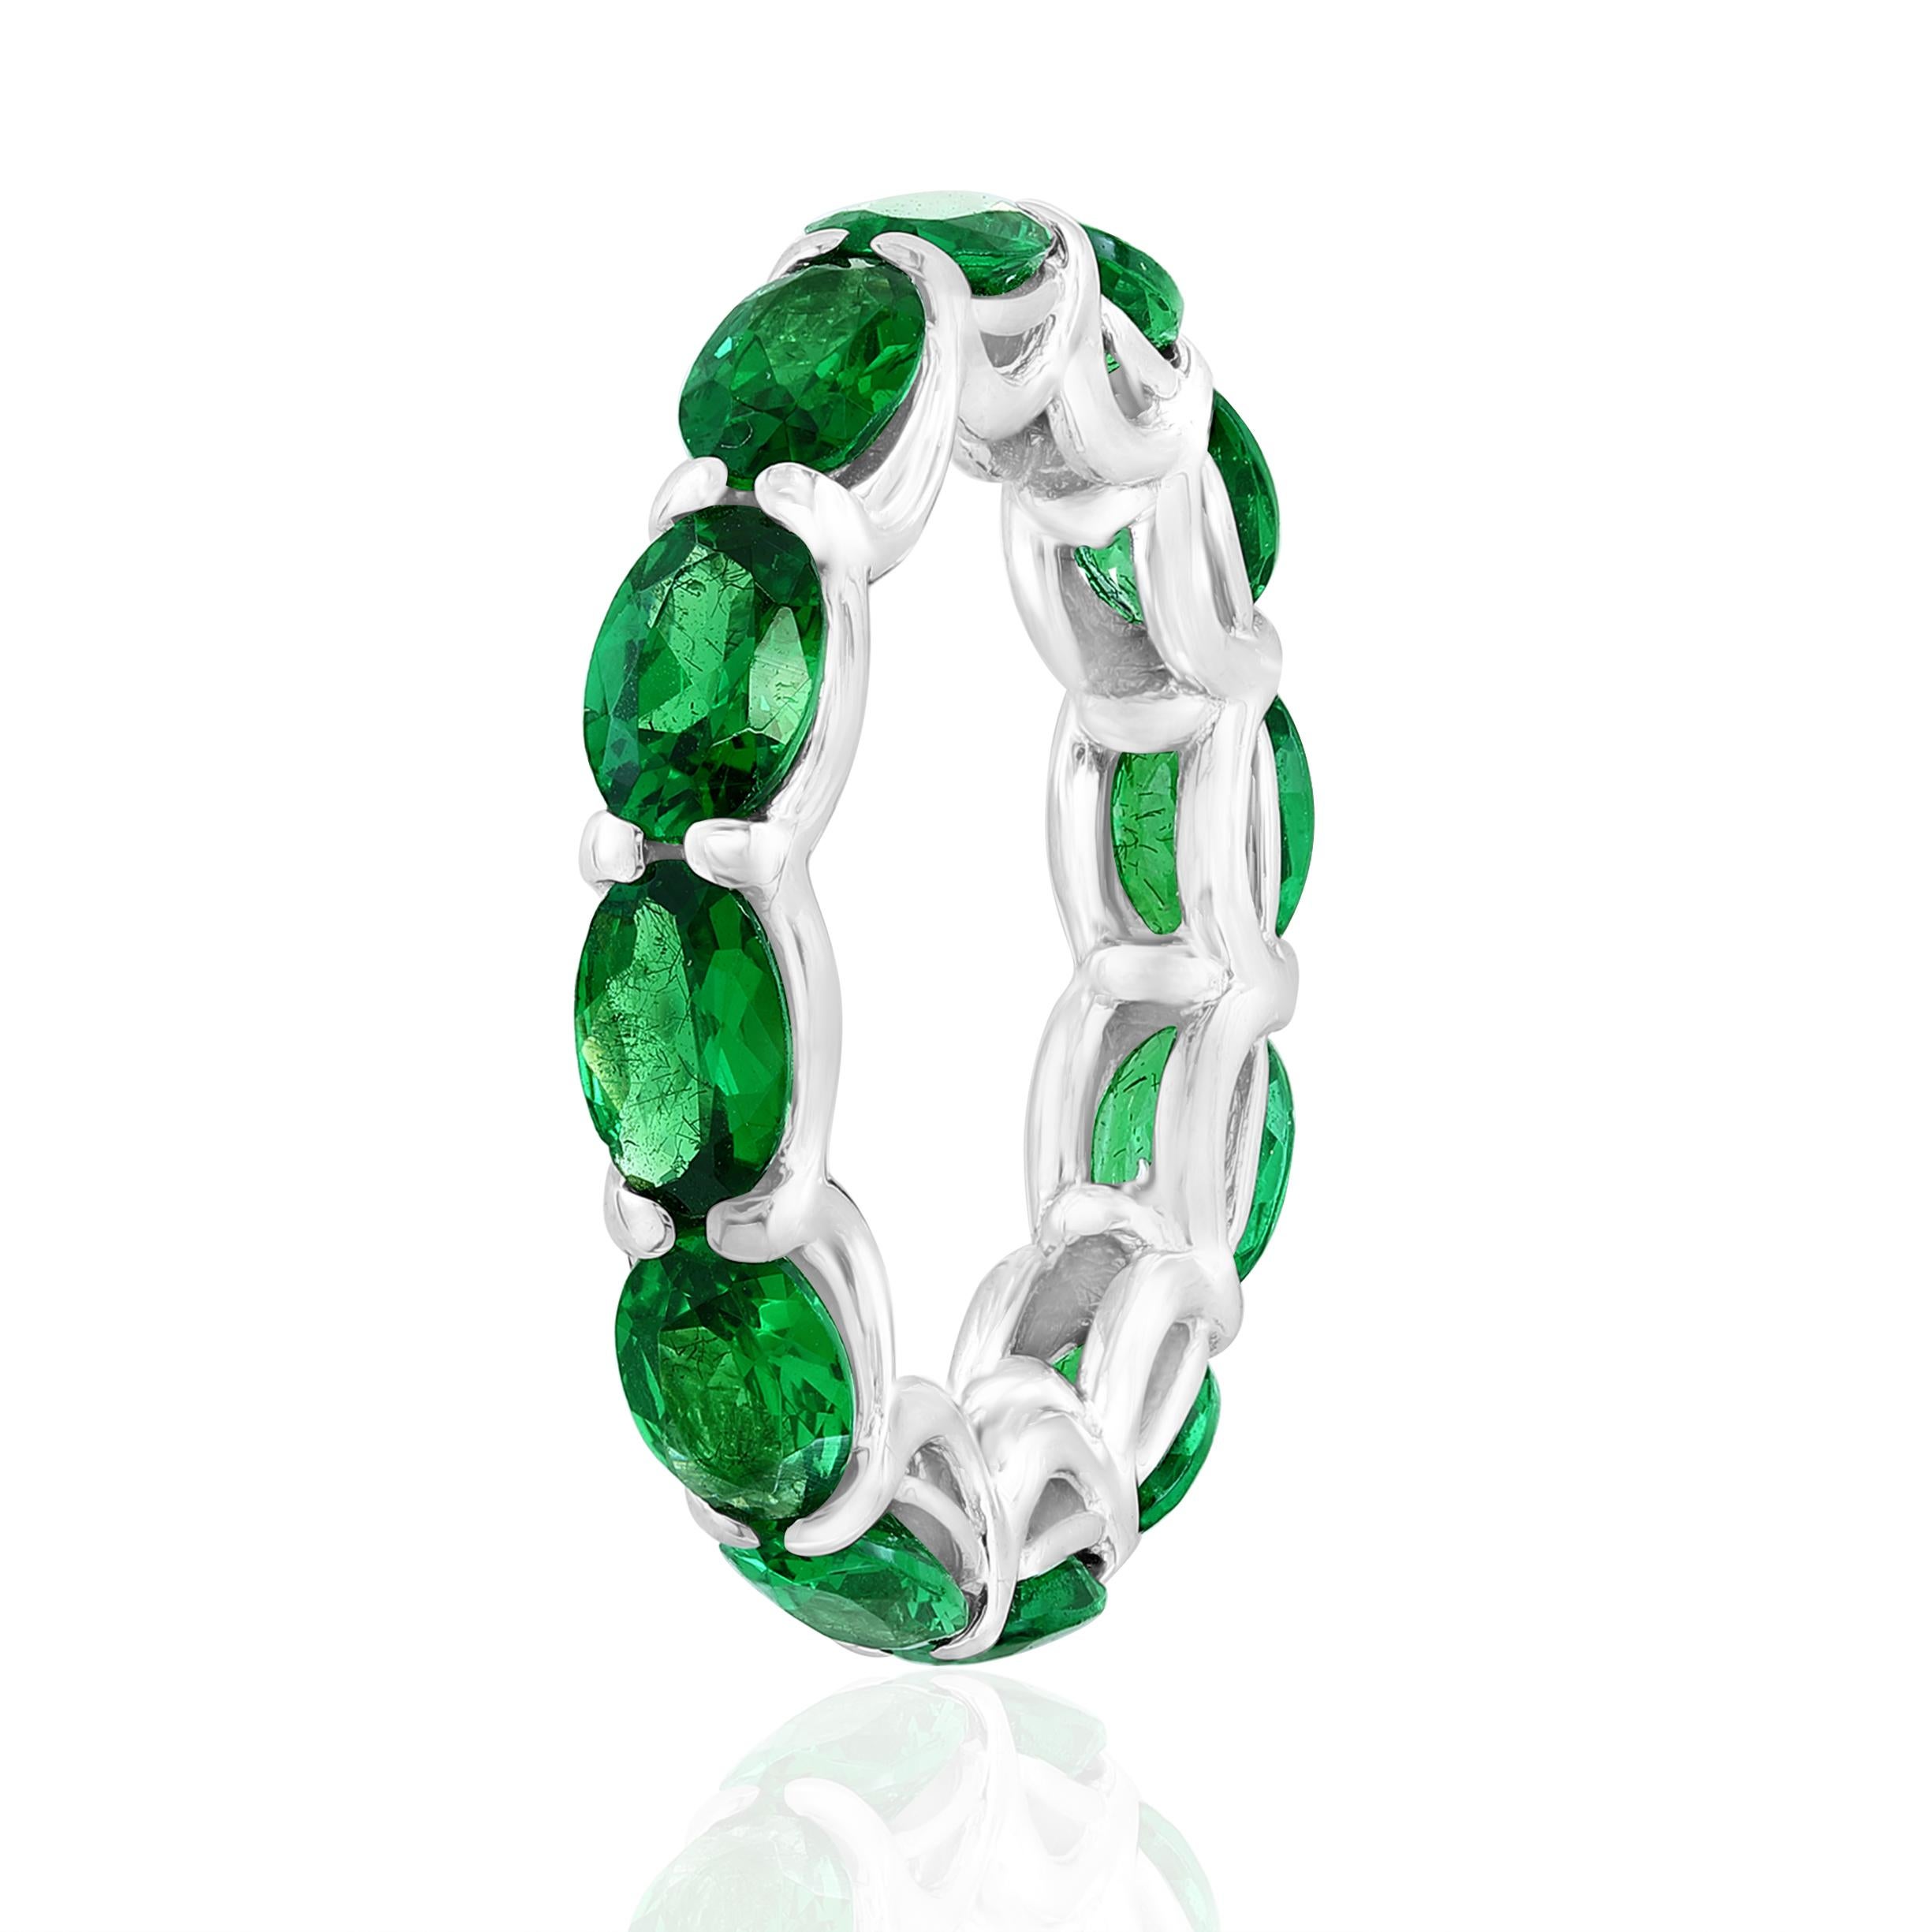 12 perfectly matched Green Tsavorites in a 18 Karat White Gold Eternity Ring setting.

5.22 Carats.

Custom ordered to be made like picture and specifications. 